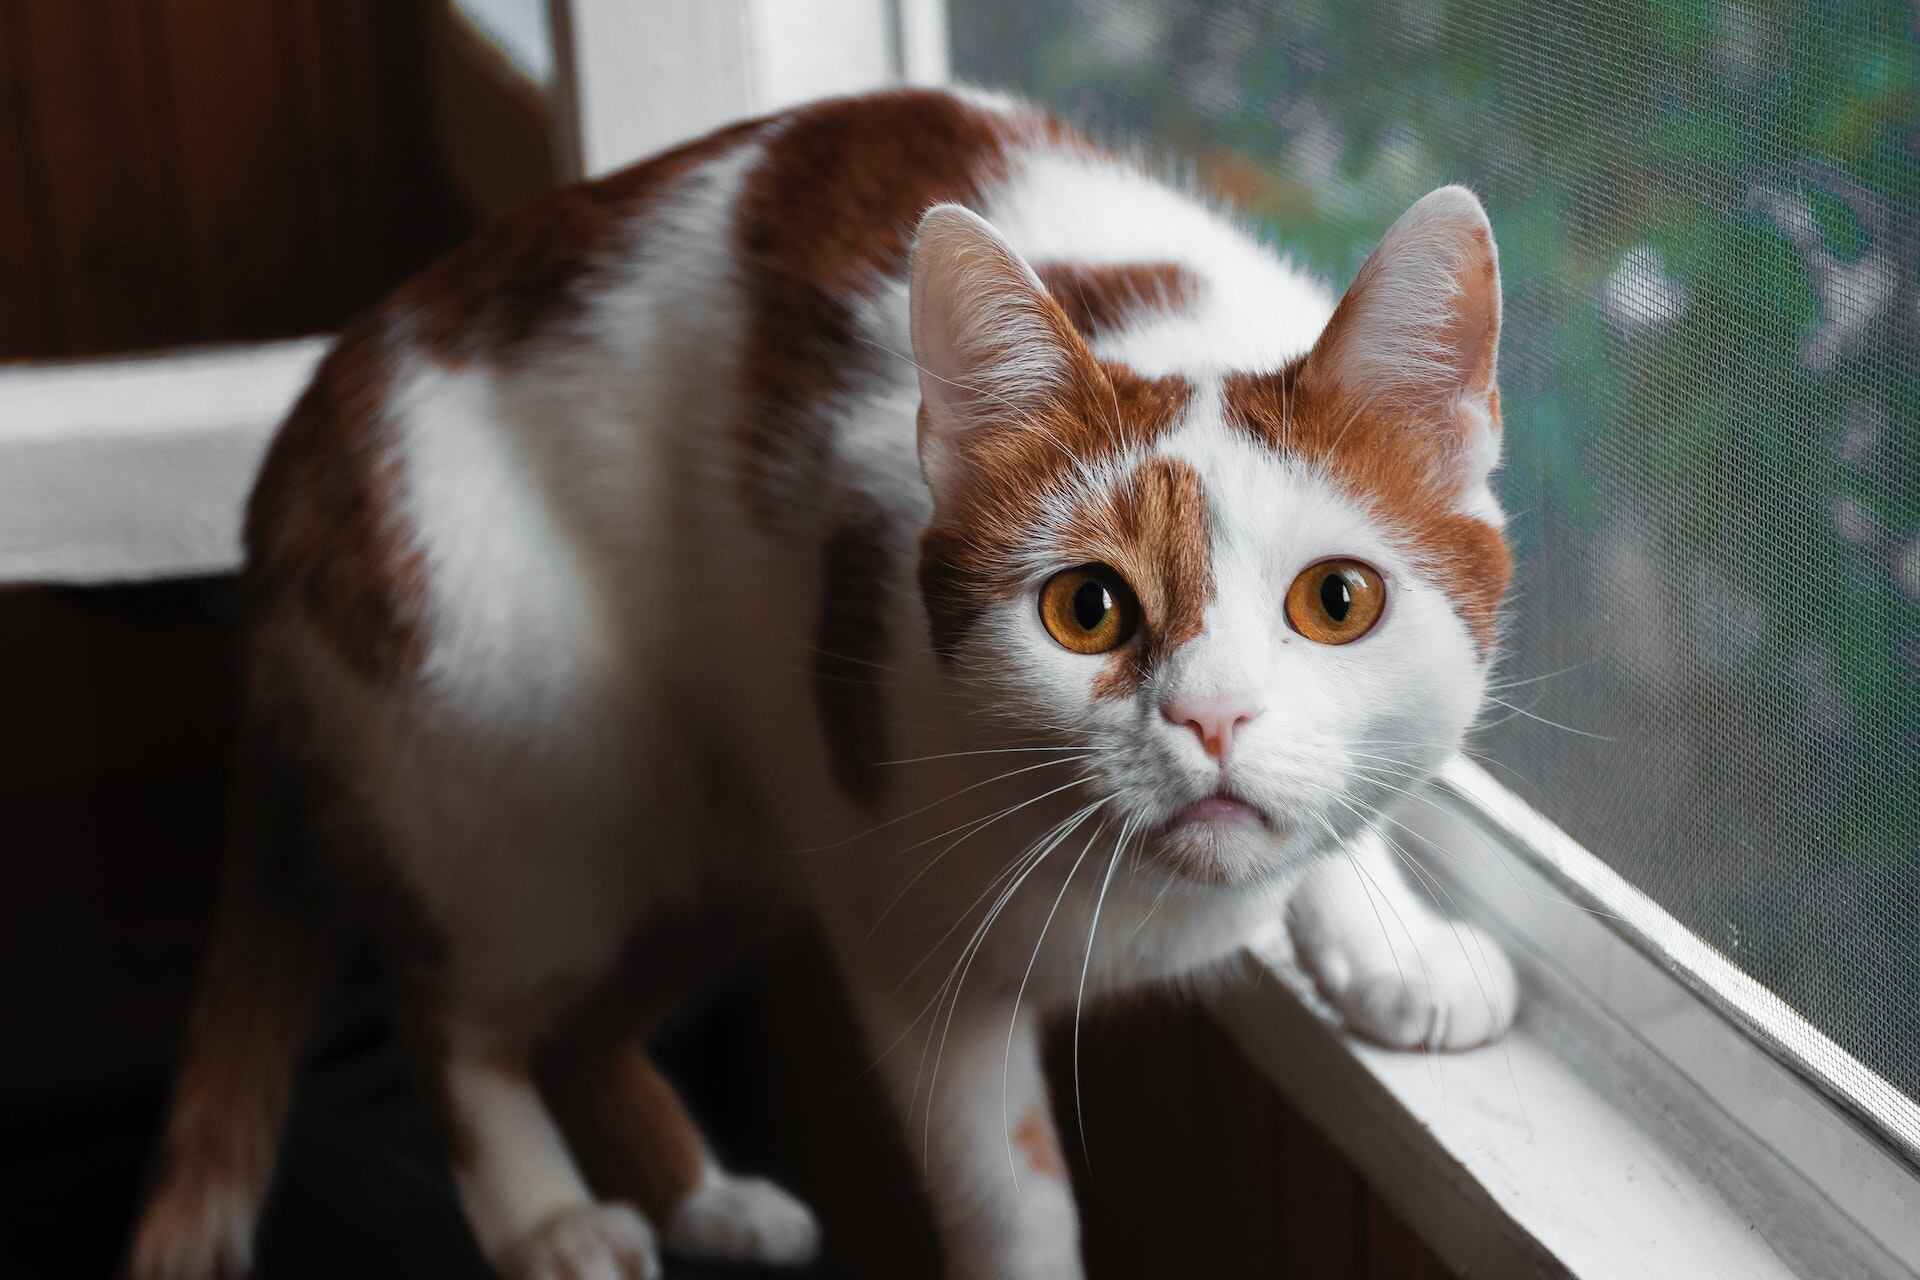 A cat sitting by a window indoors